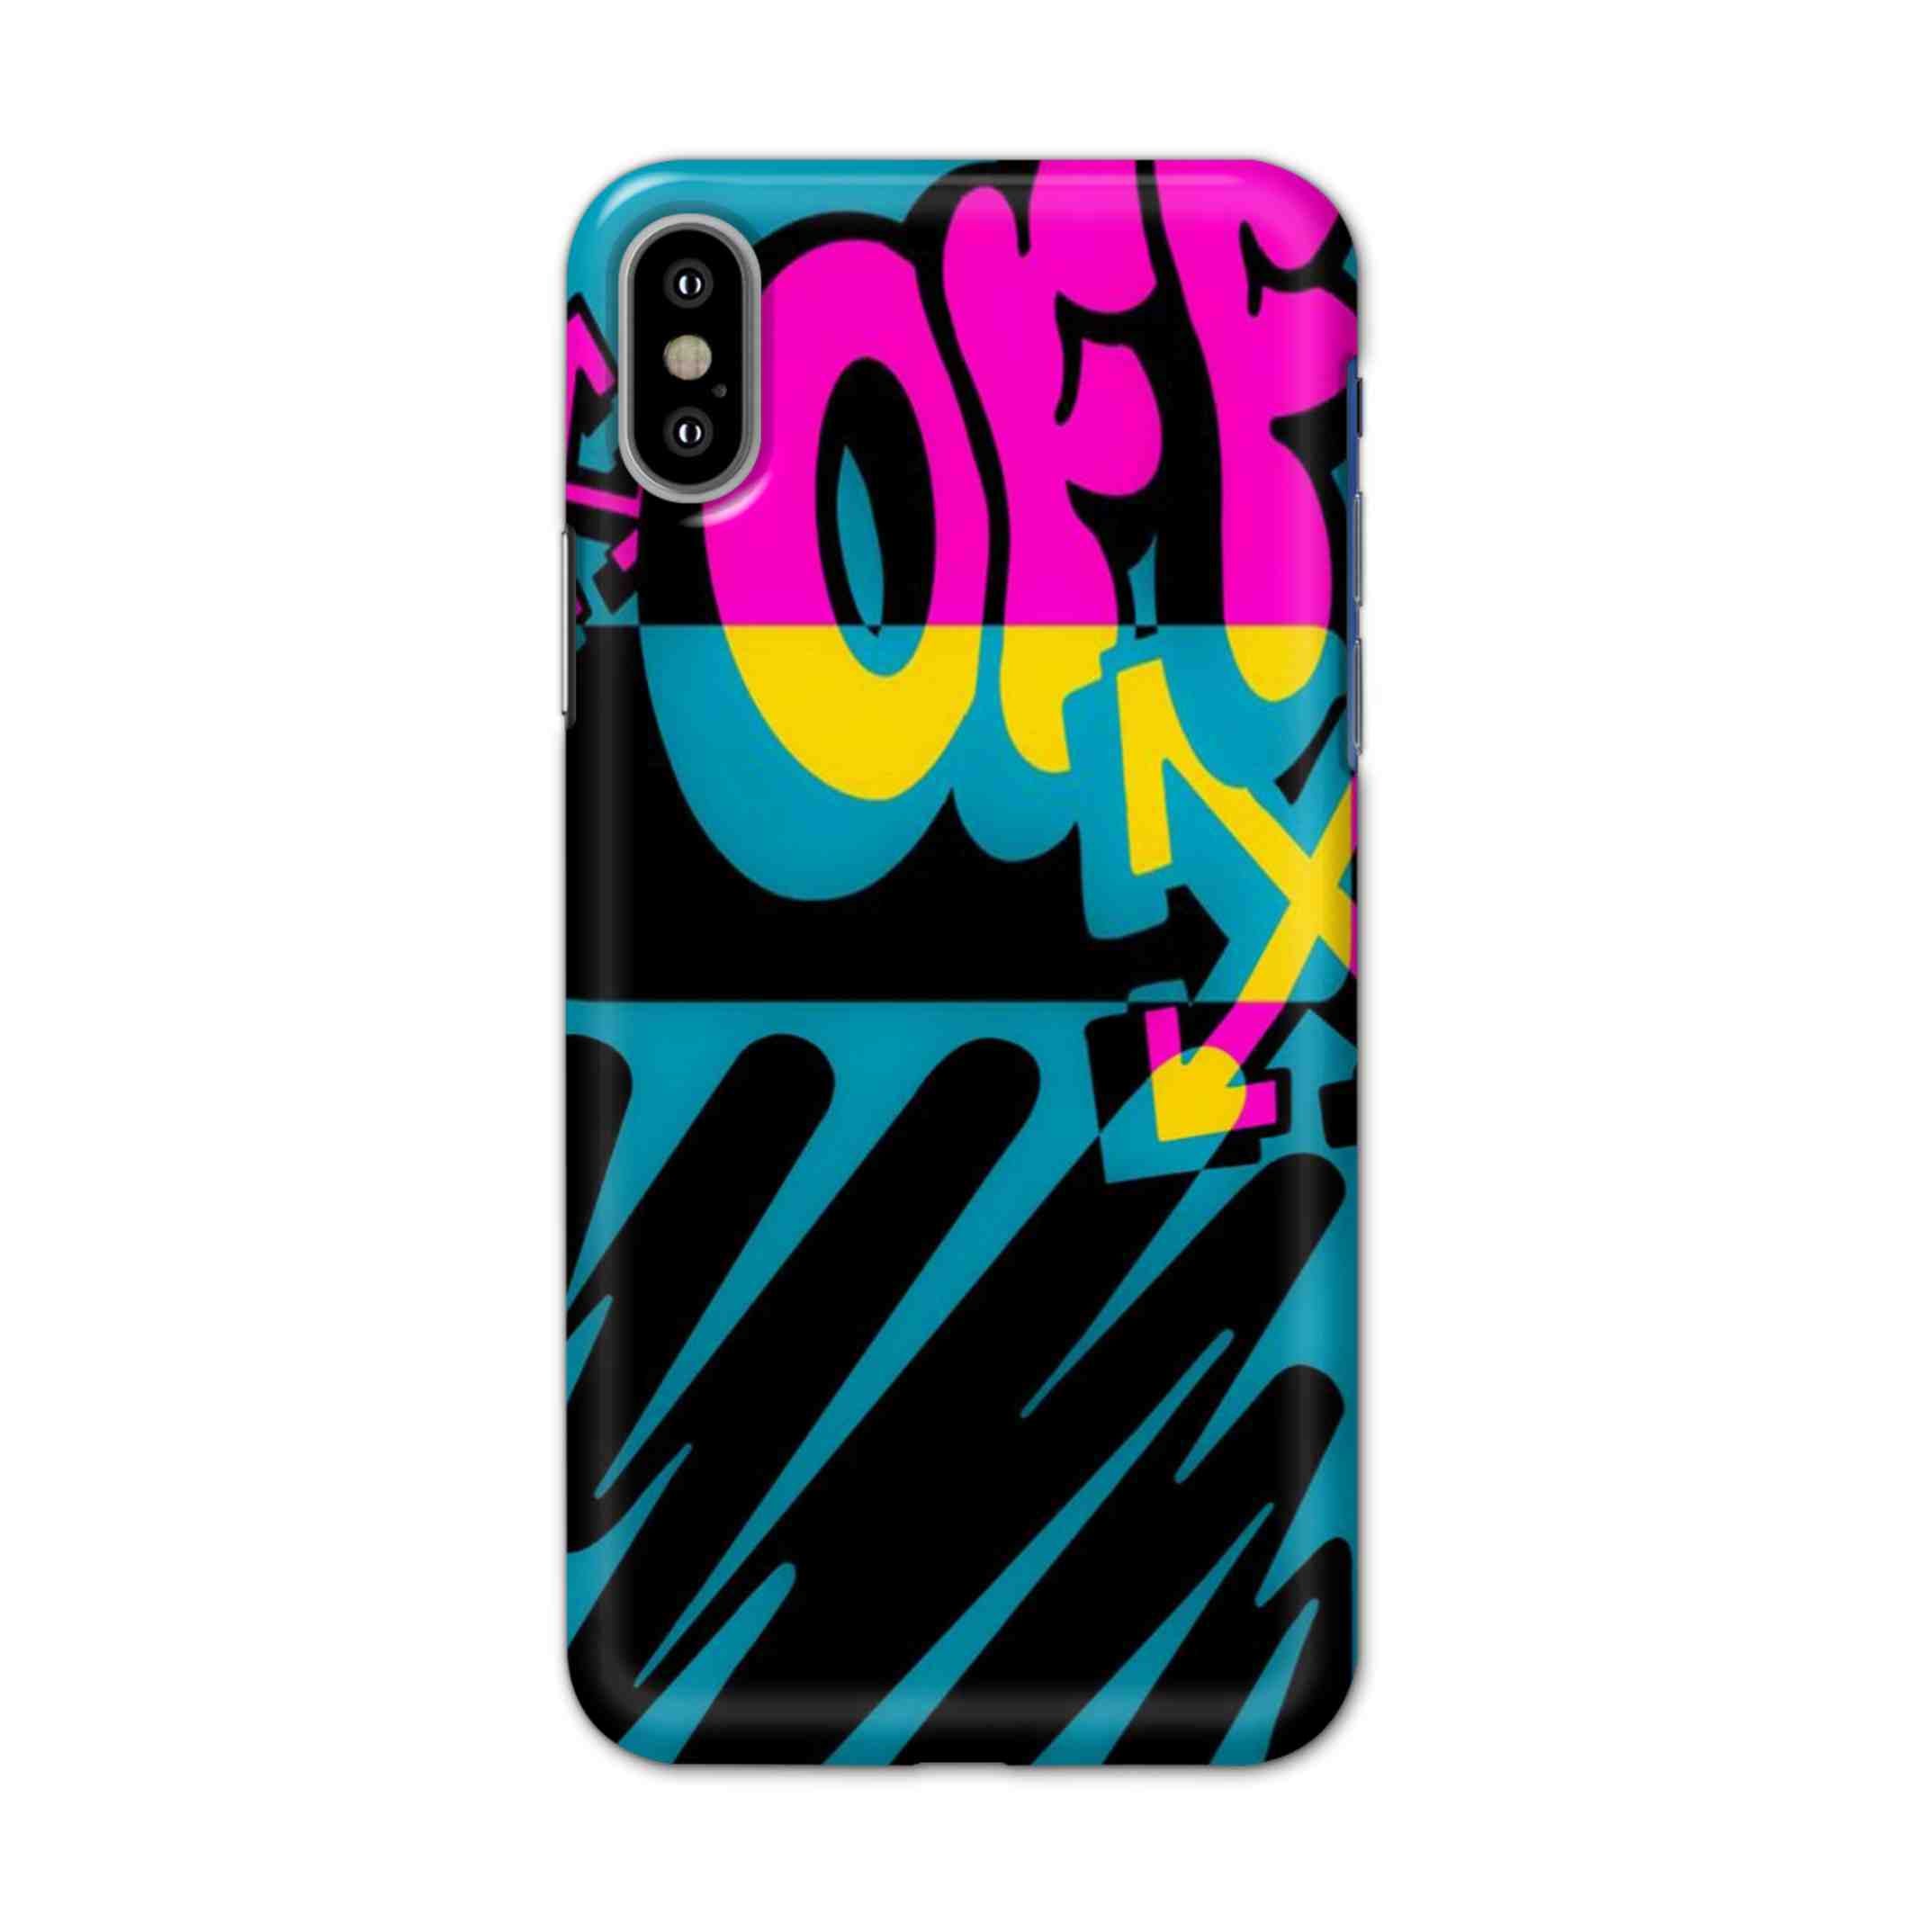 Buy Off Hard Back Mobile Phone Case/Cover For iPhone X Online